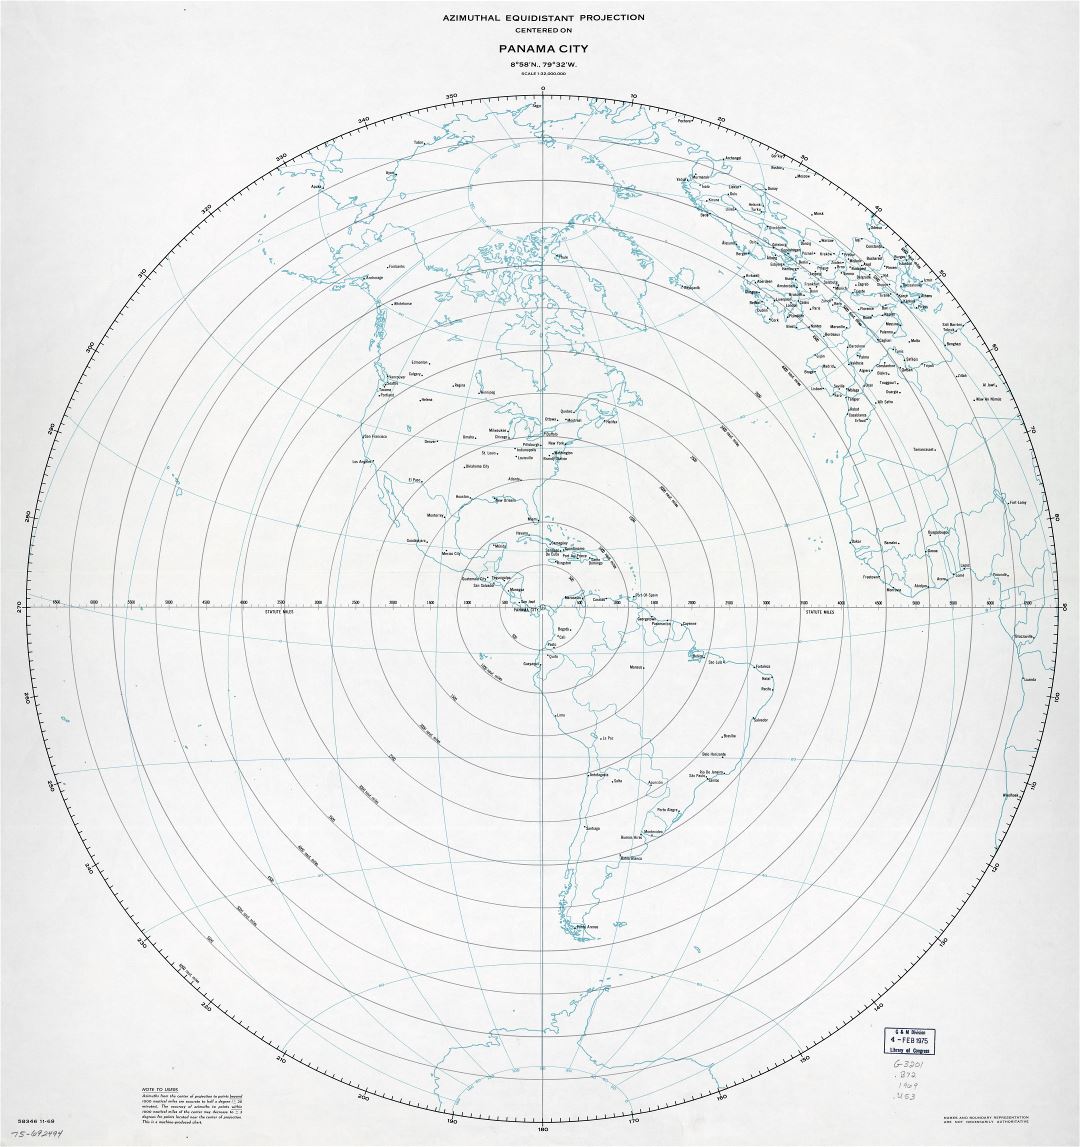 Large scale detailed azimuthal equidistant projection map centered on Panama city, Panama - 1969